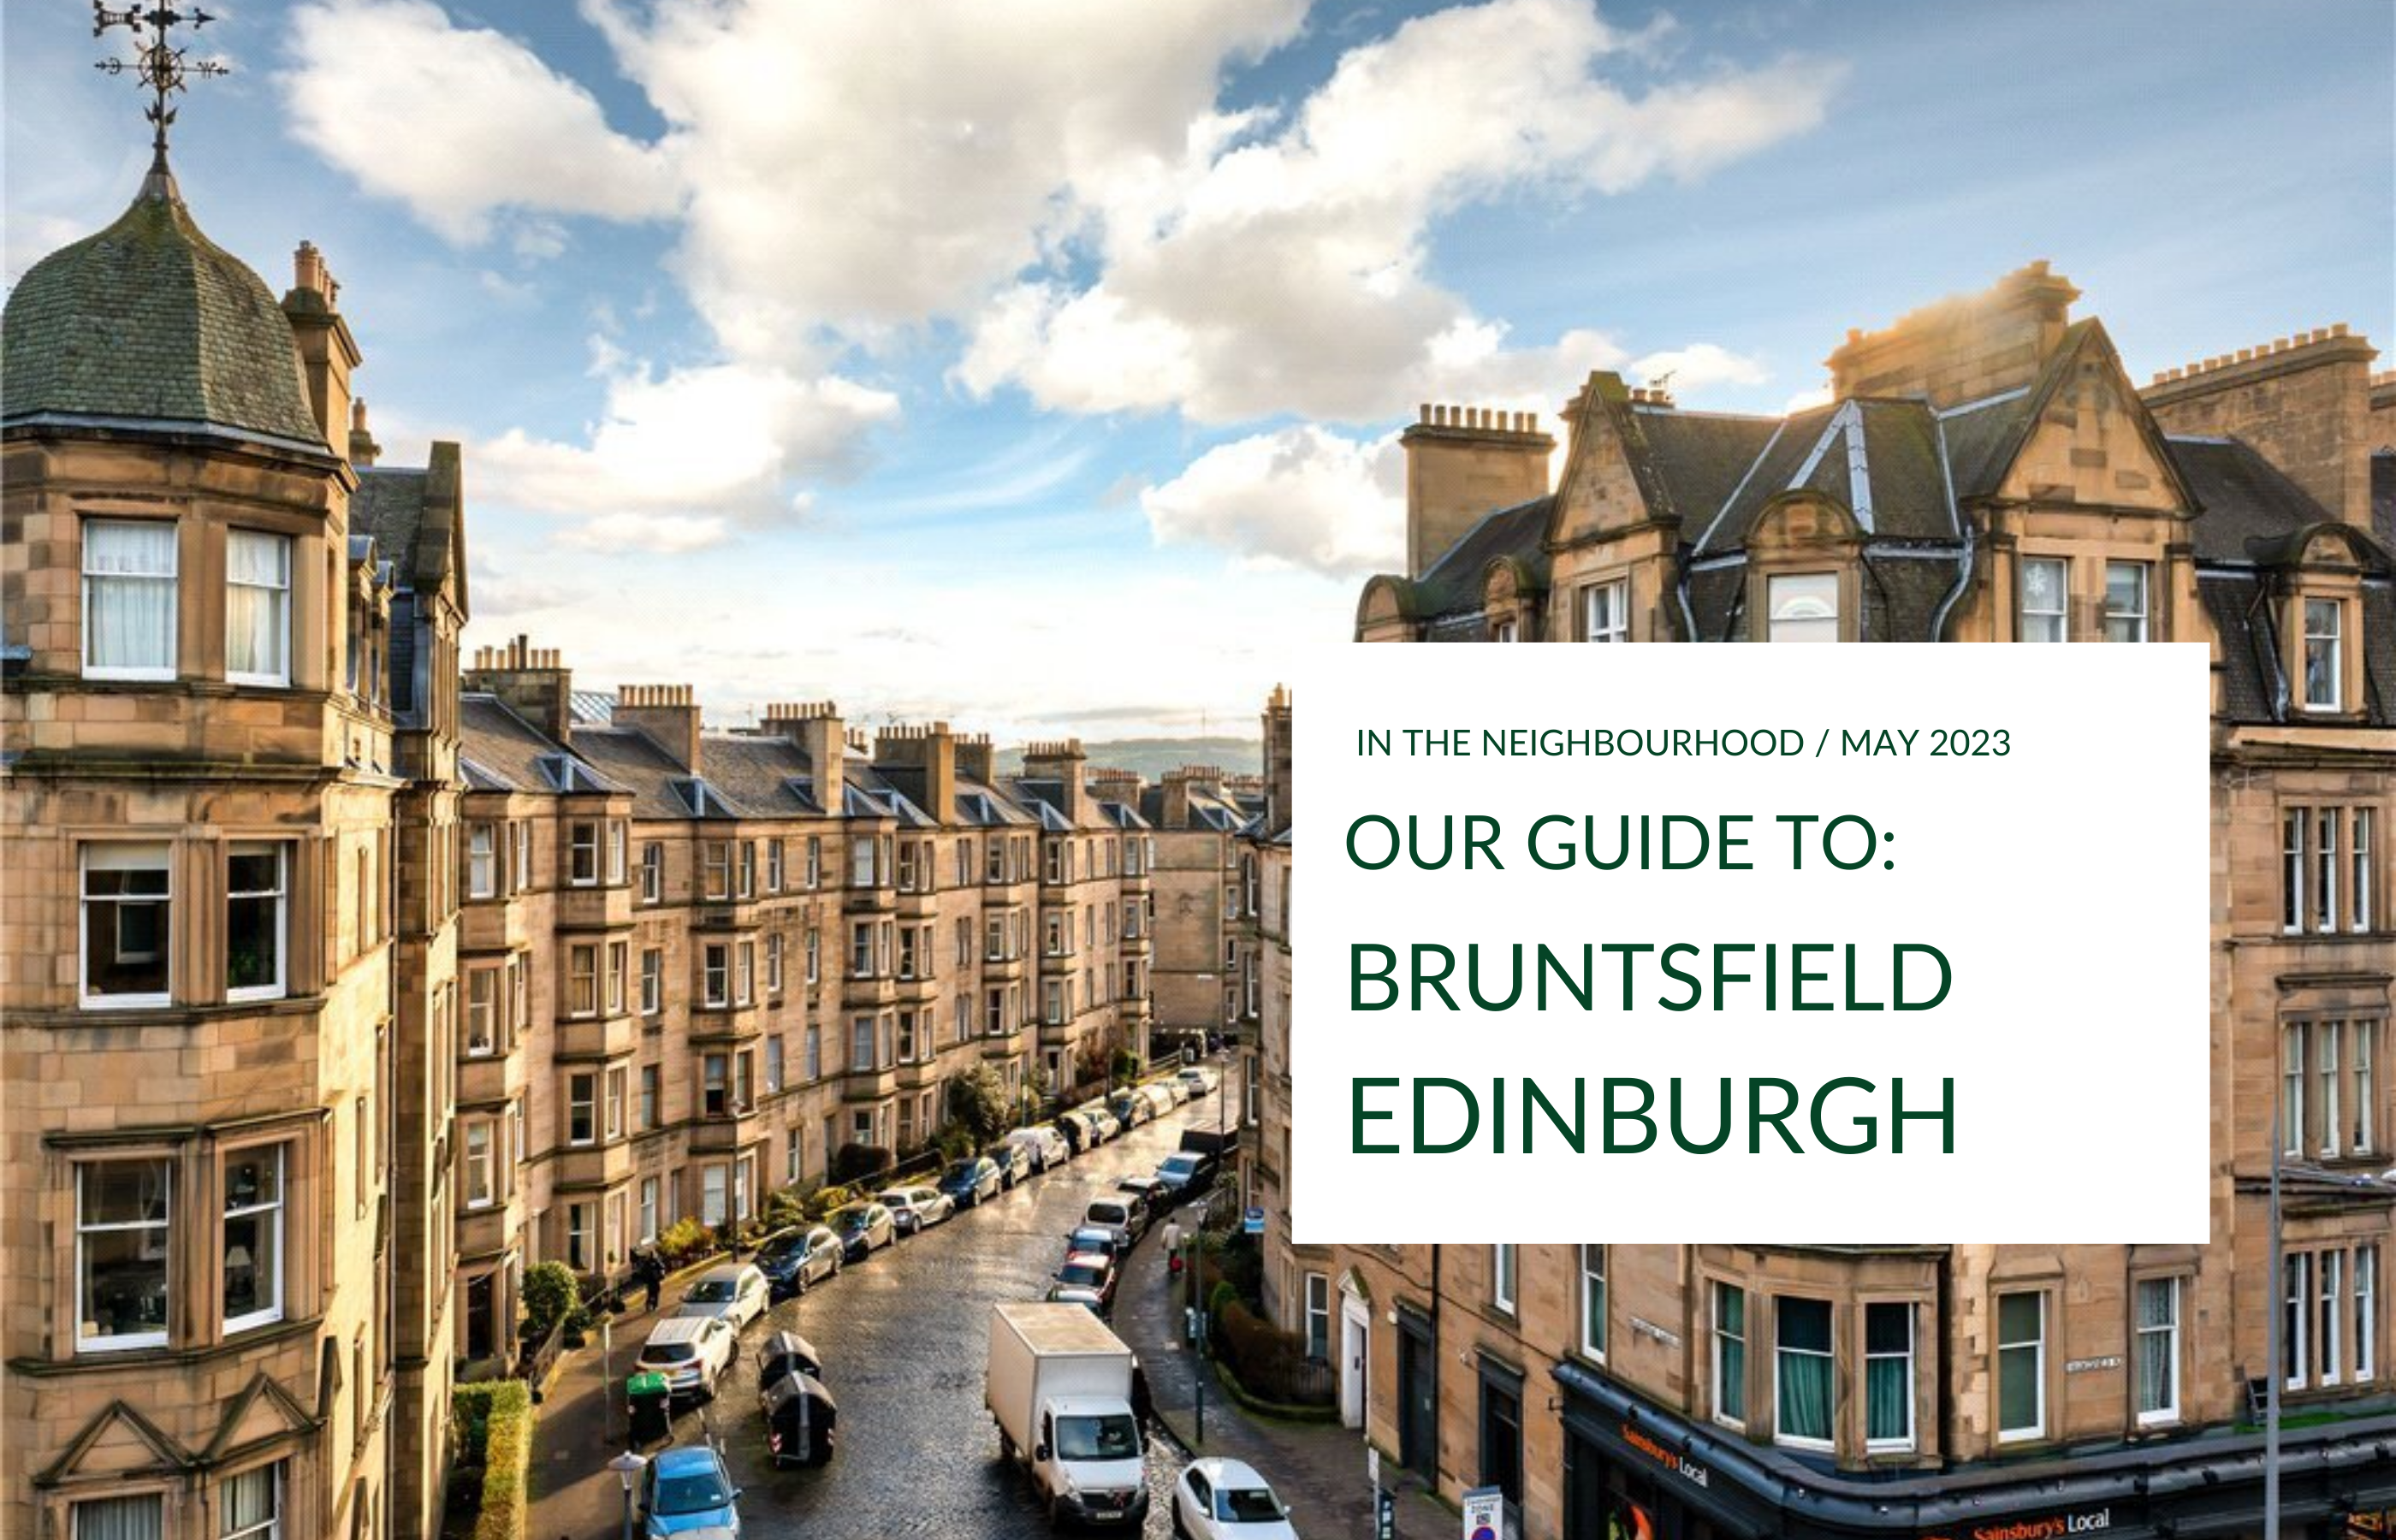 Image of tenements with text reading - In the Neighbourhood - Bruntsfield